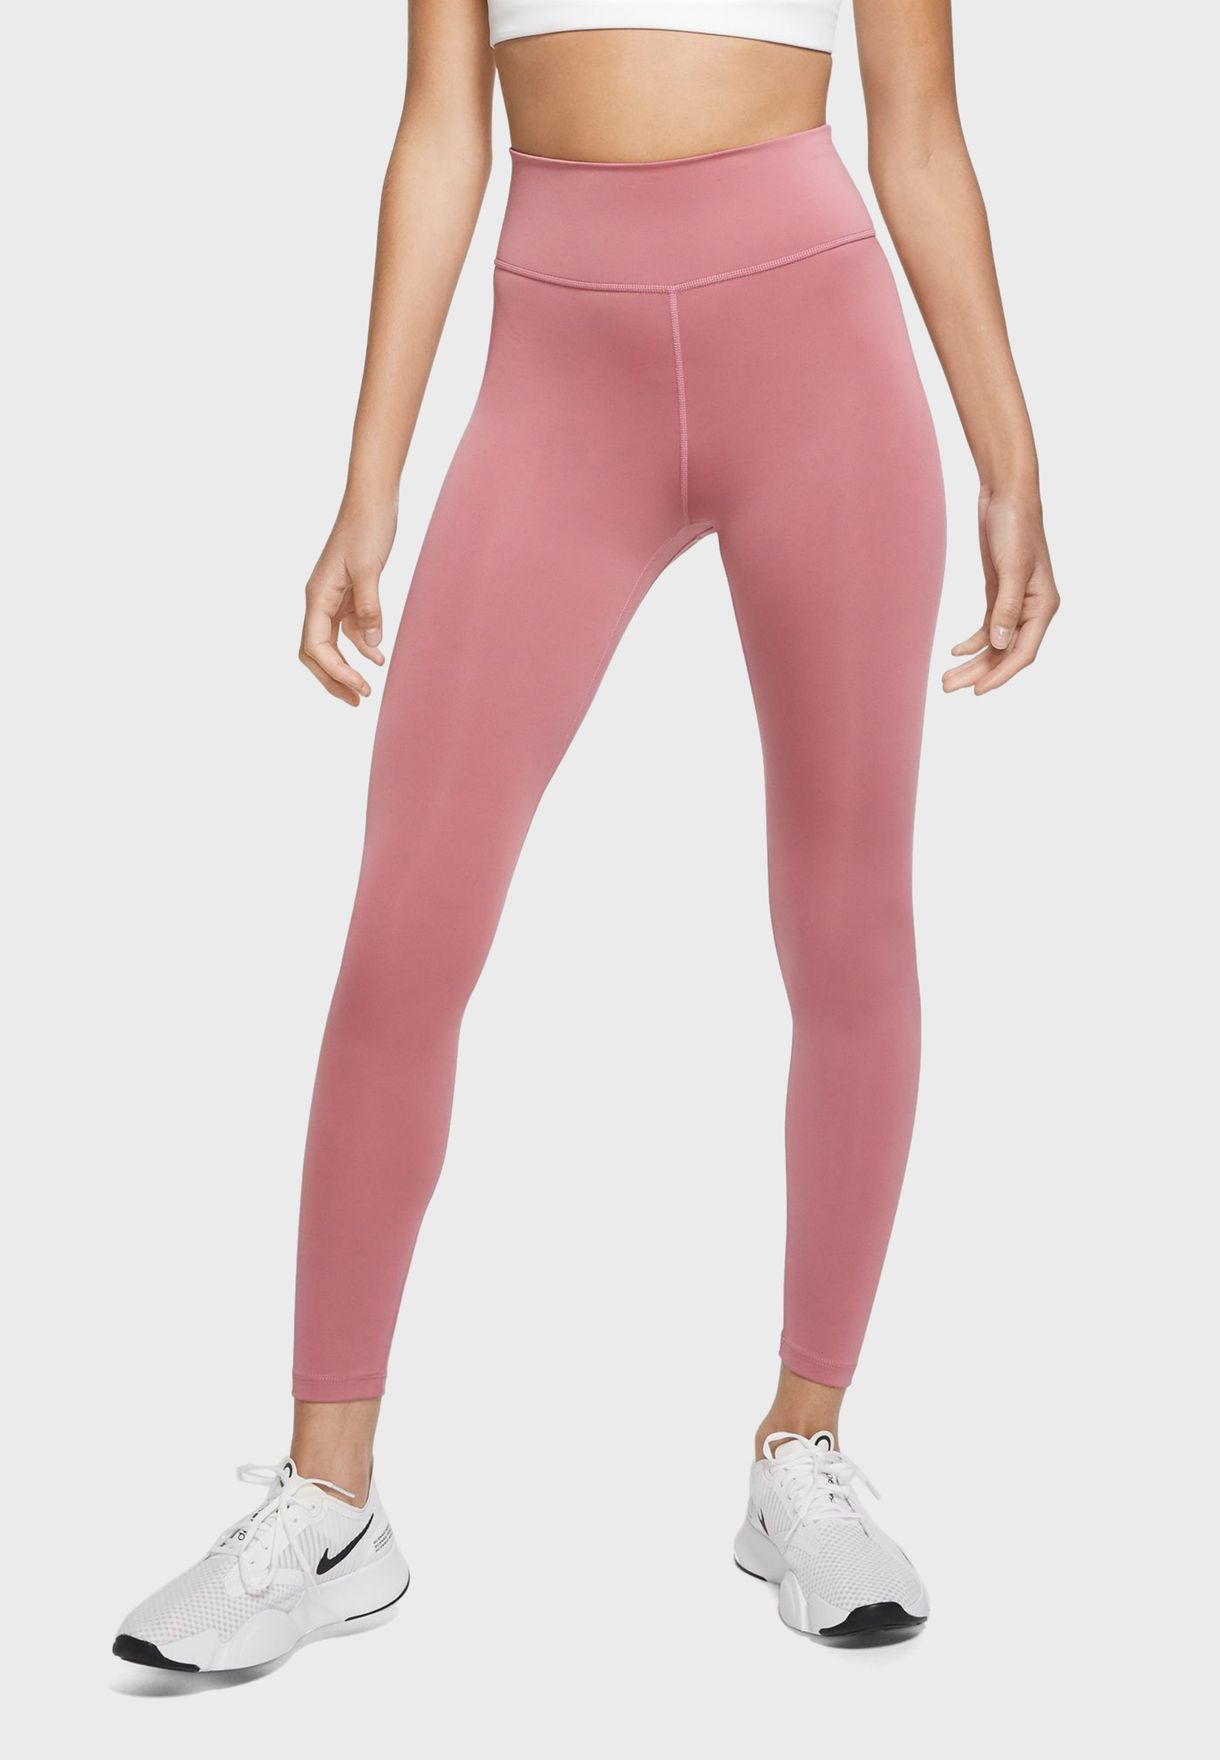 Buy Nike pink Graphic 7/8 Tights for 